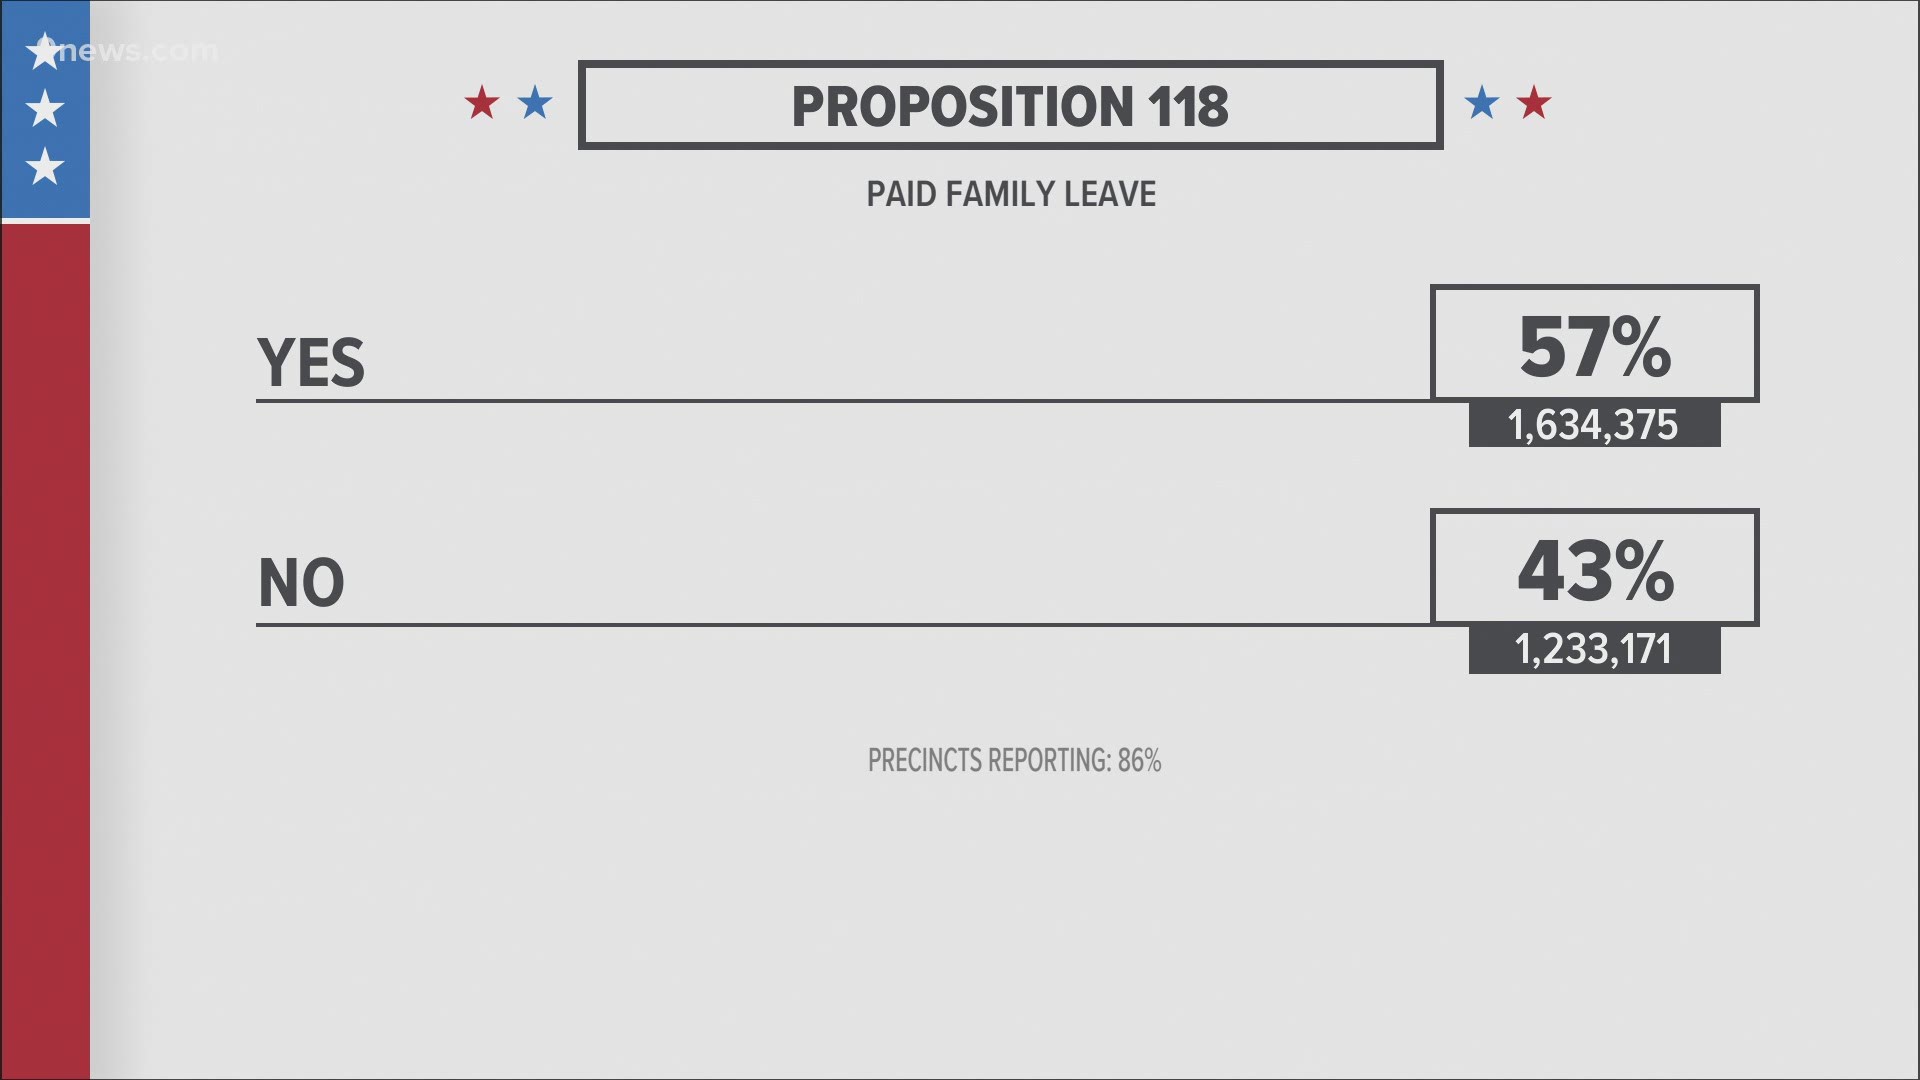 Proposition 118 asked voters to approve paid family medical leave starting in 2024.